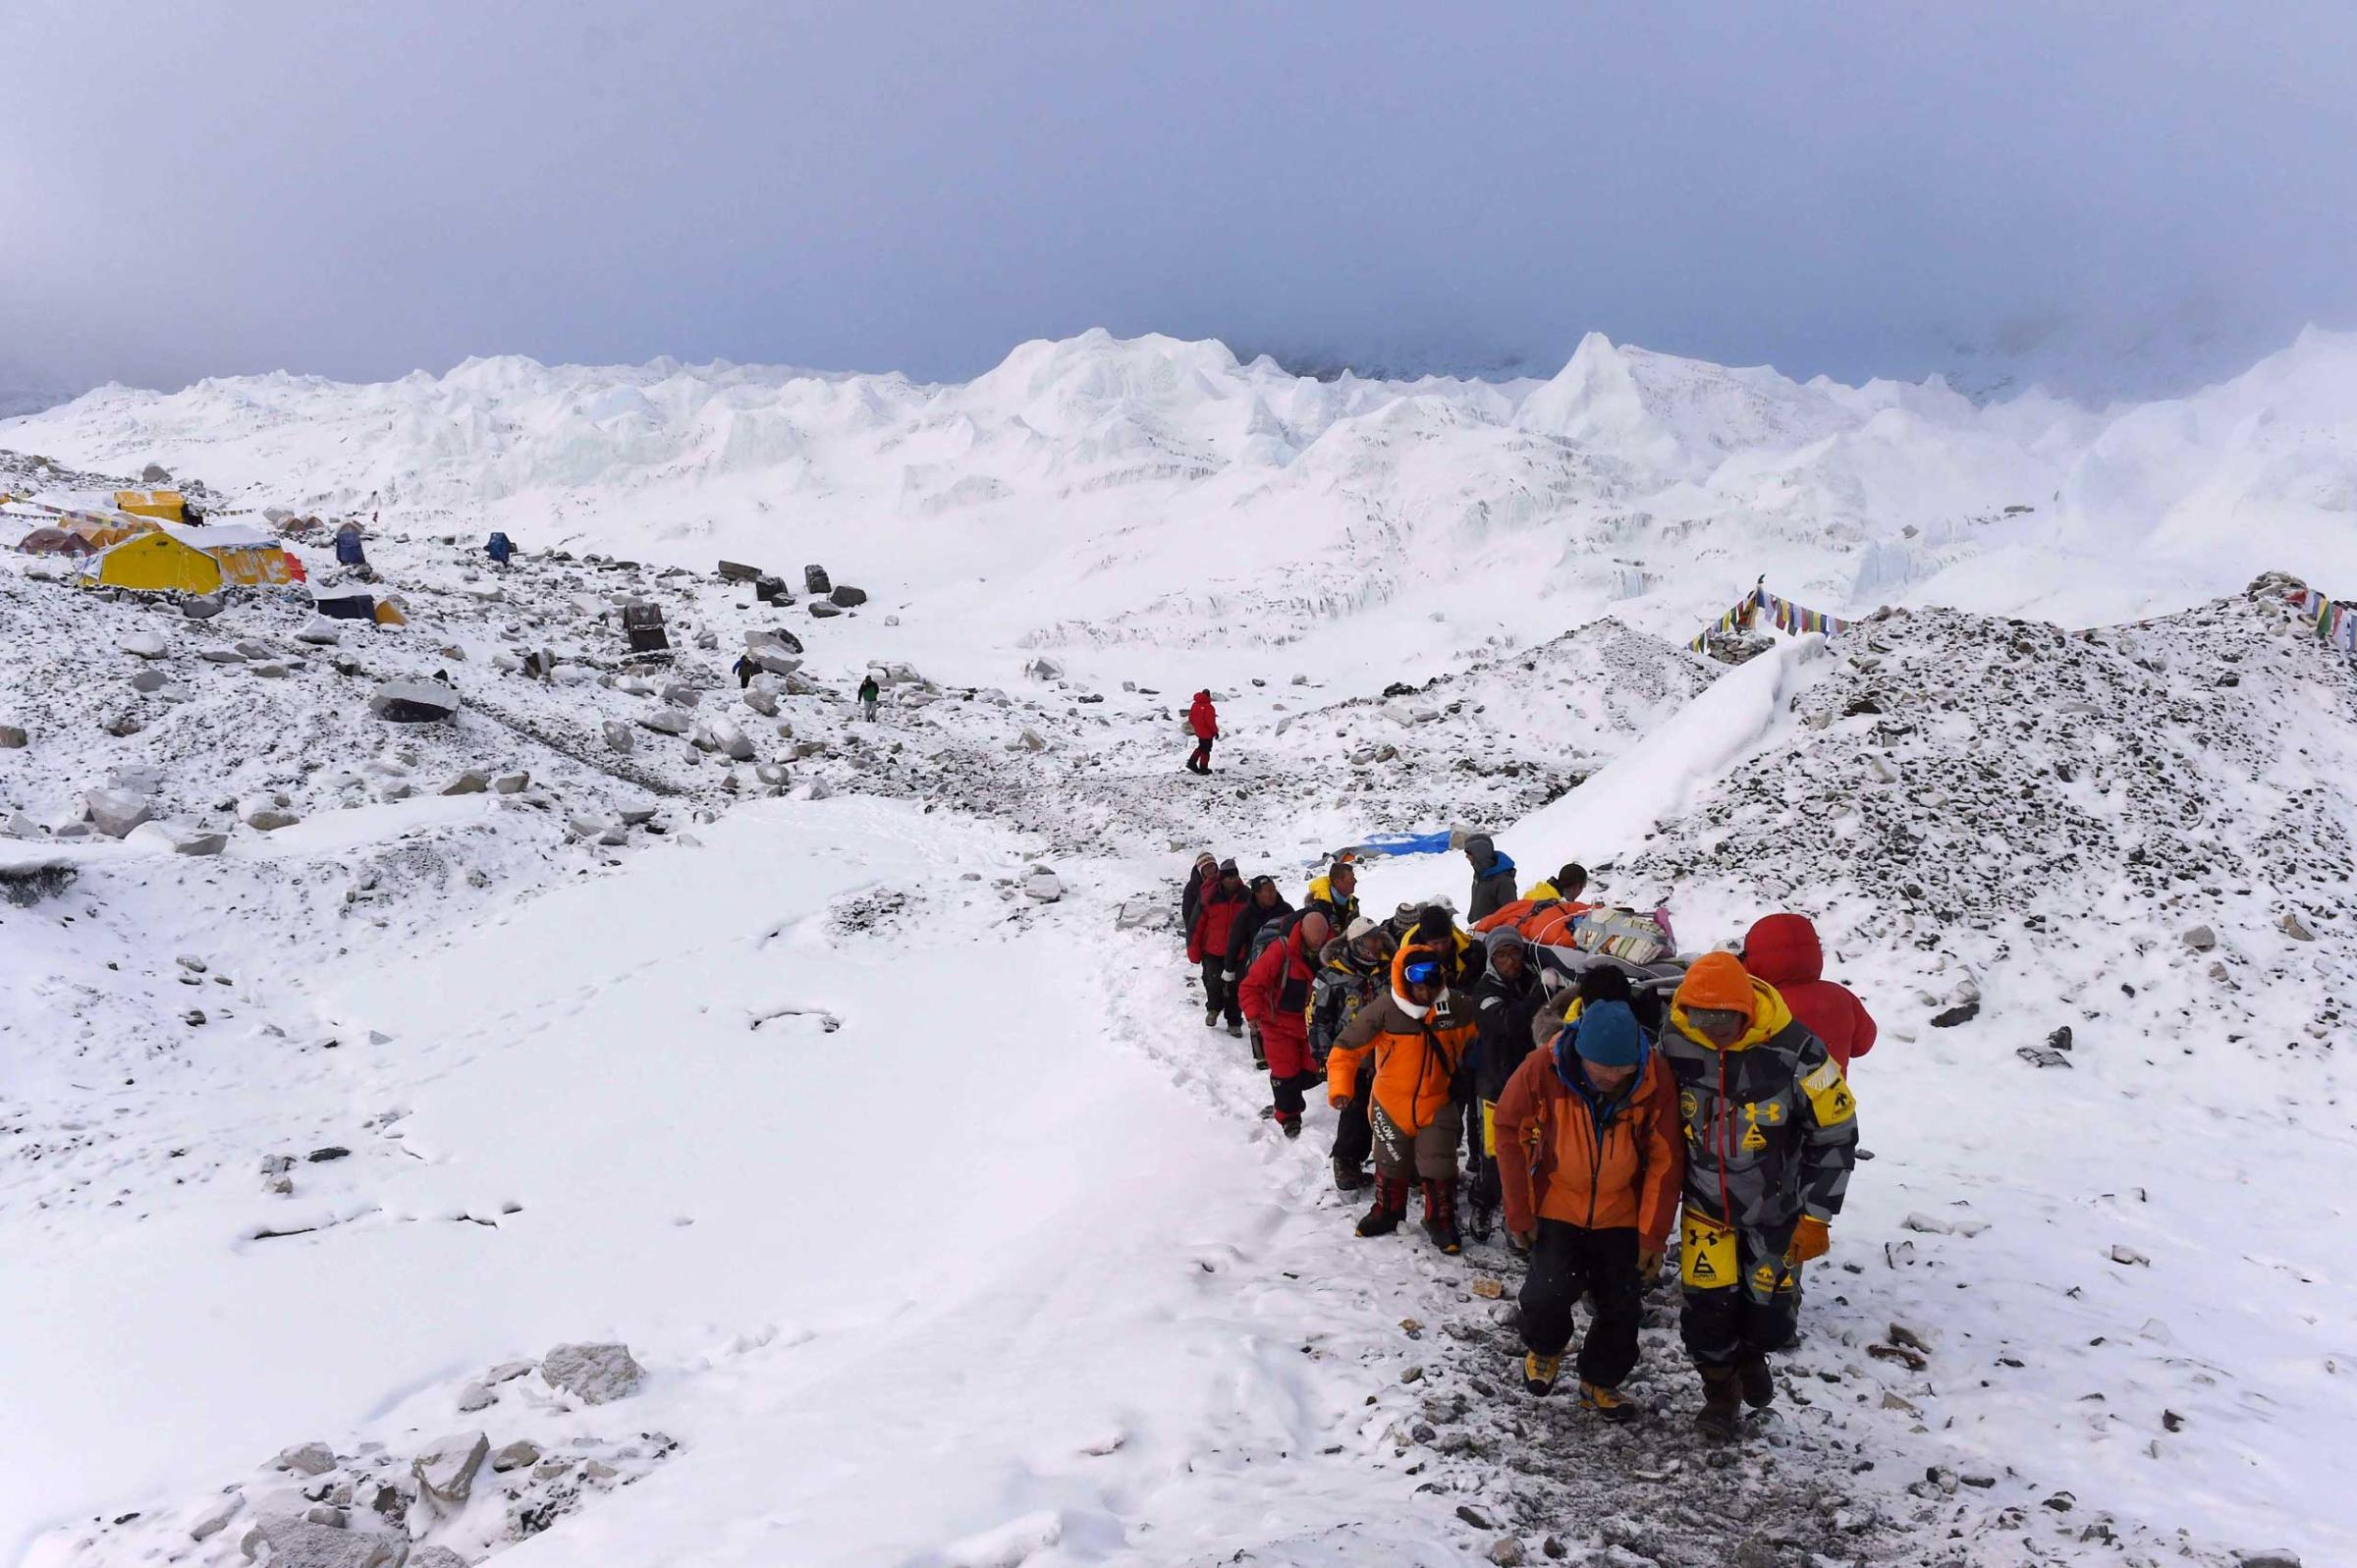 A person injured in Saturday's avalanche is carried by rescue members to be airlifted by a rescue helicopter at Everest Base Camp on April 26, 2015.